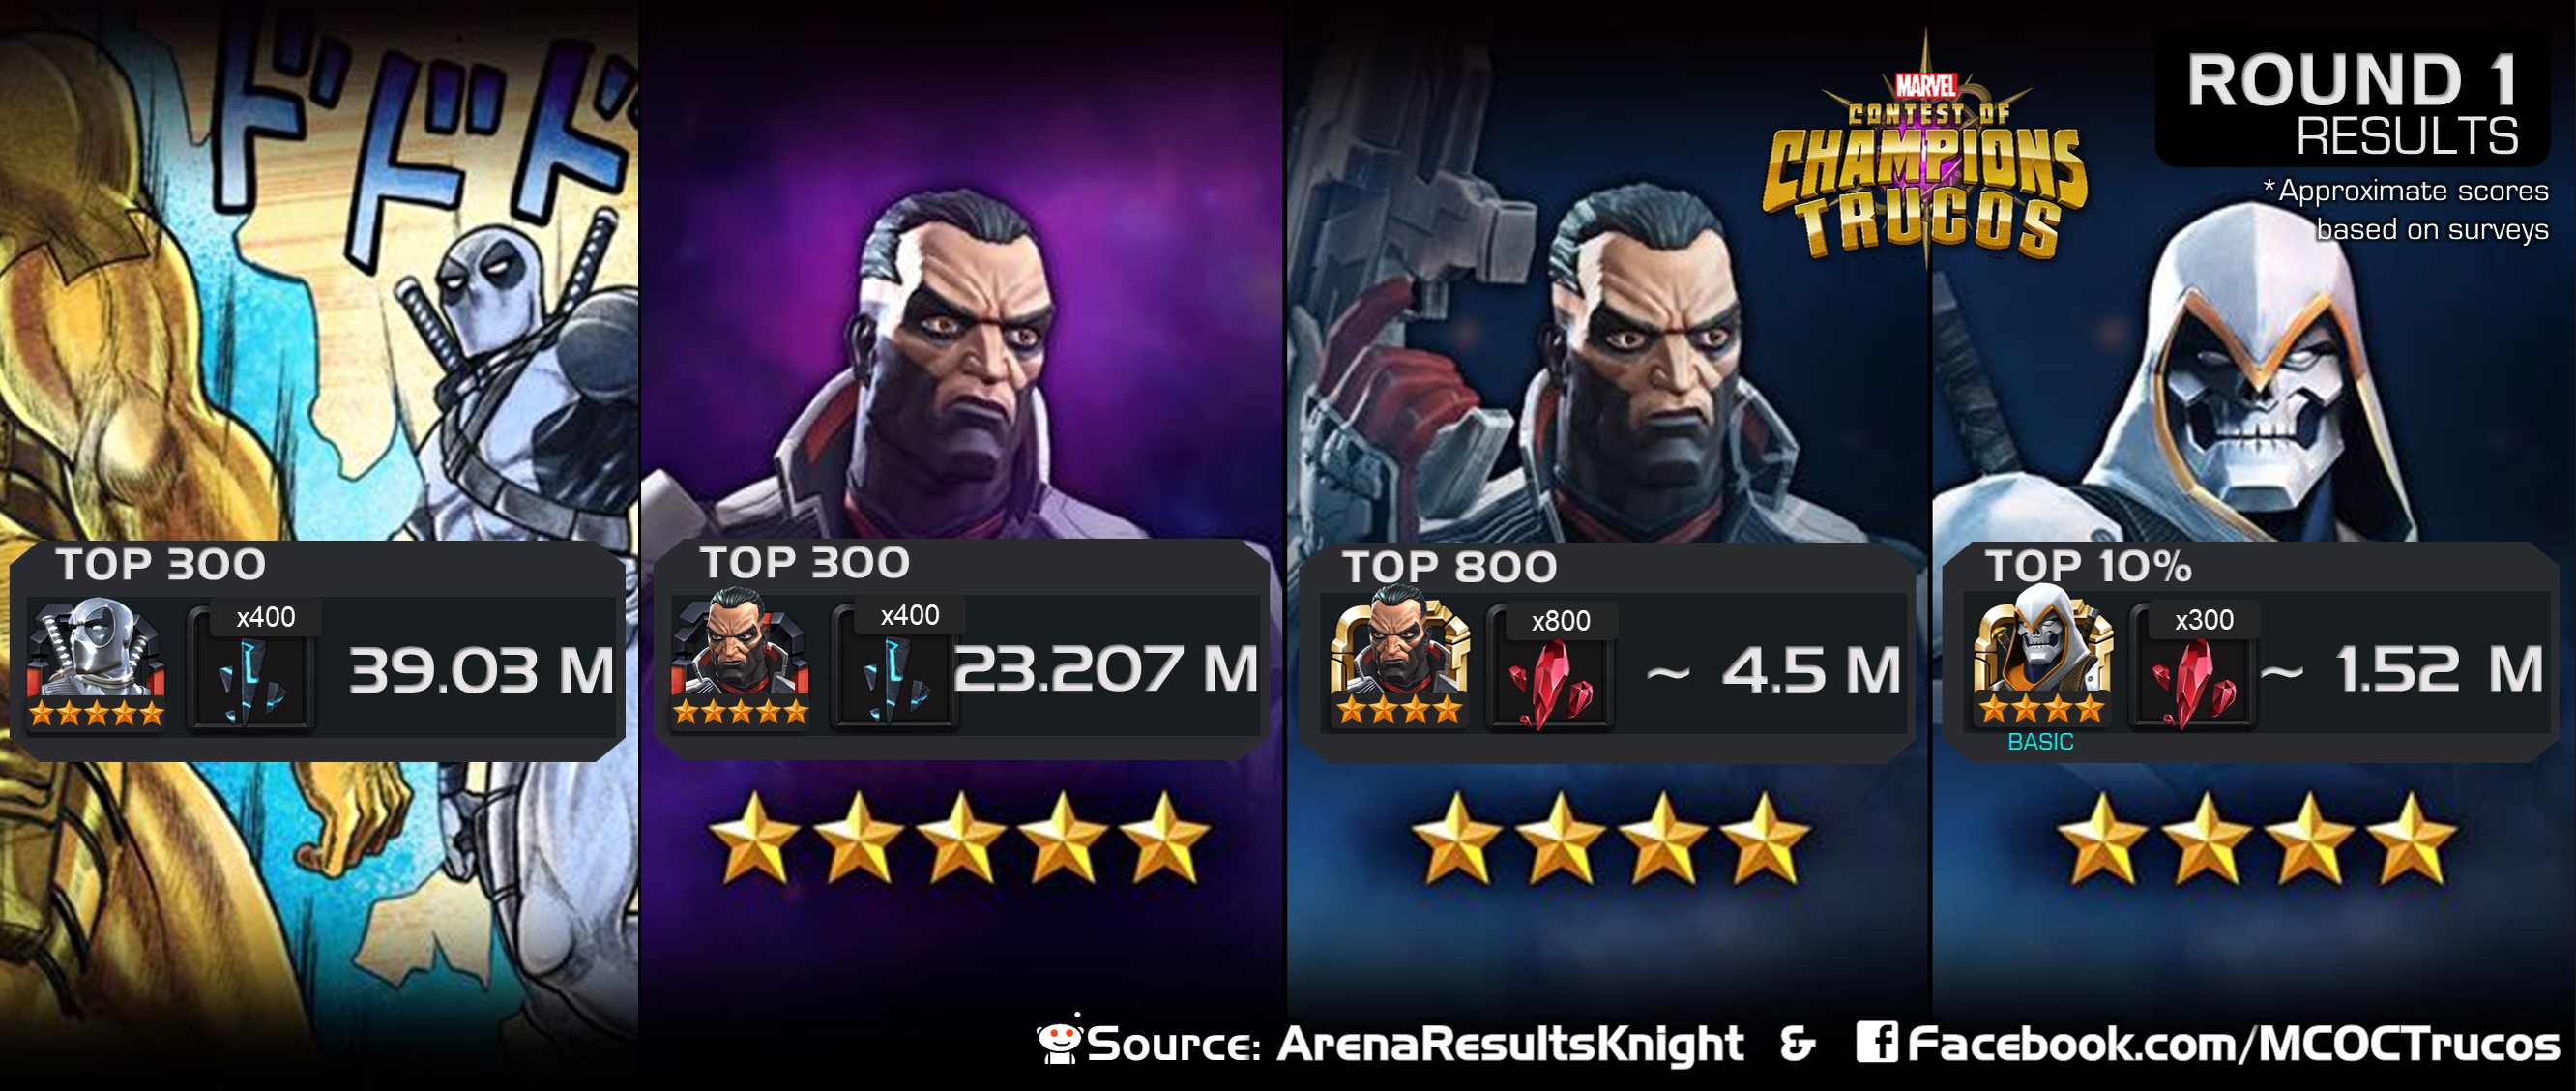 Jernbanestation quagga Pind MarvelTrucos on Twitter: "#ContestOfChampions #cutoff #Marvel #MCoC 🆚ROUND  1 RESULTS https://t.co/9eolf4COVt ⚠️Veteran bracket +2 months ⚠️Scores for  round 2 could be different ⚠️APPROXIMATE scores!!! https://t.co/65LzTW8Xir"  / Twitter